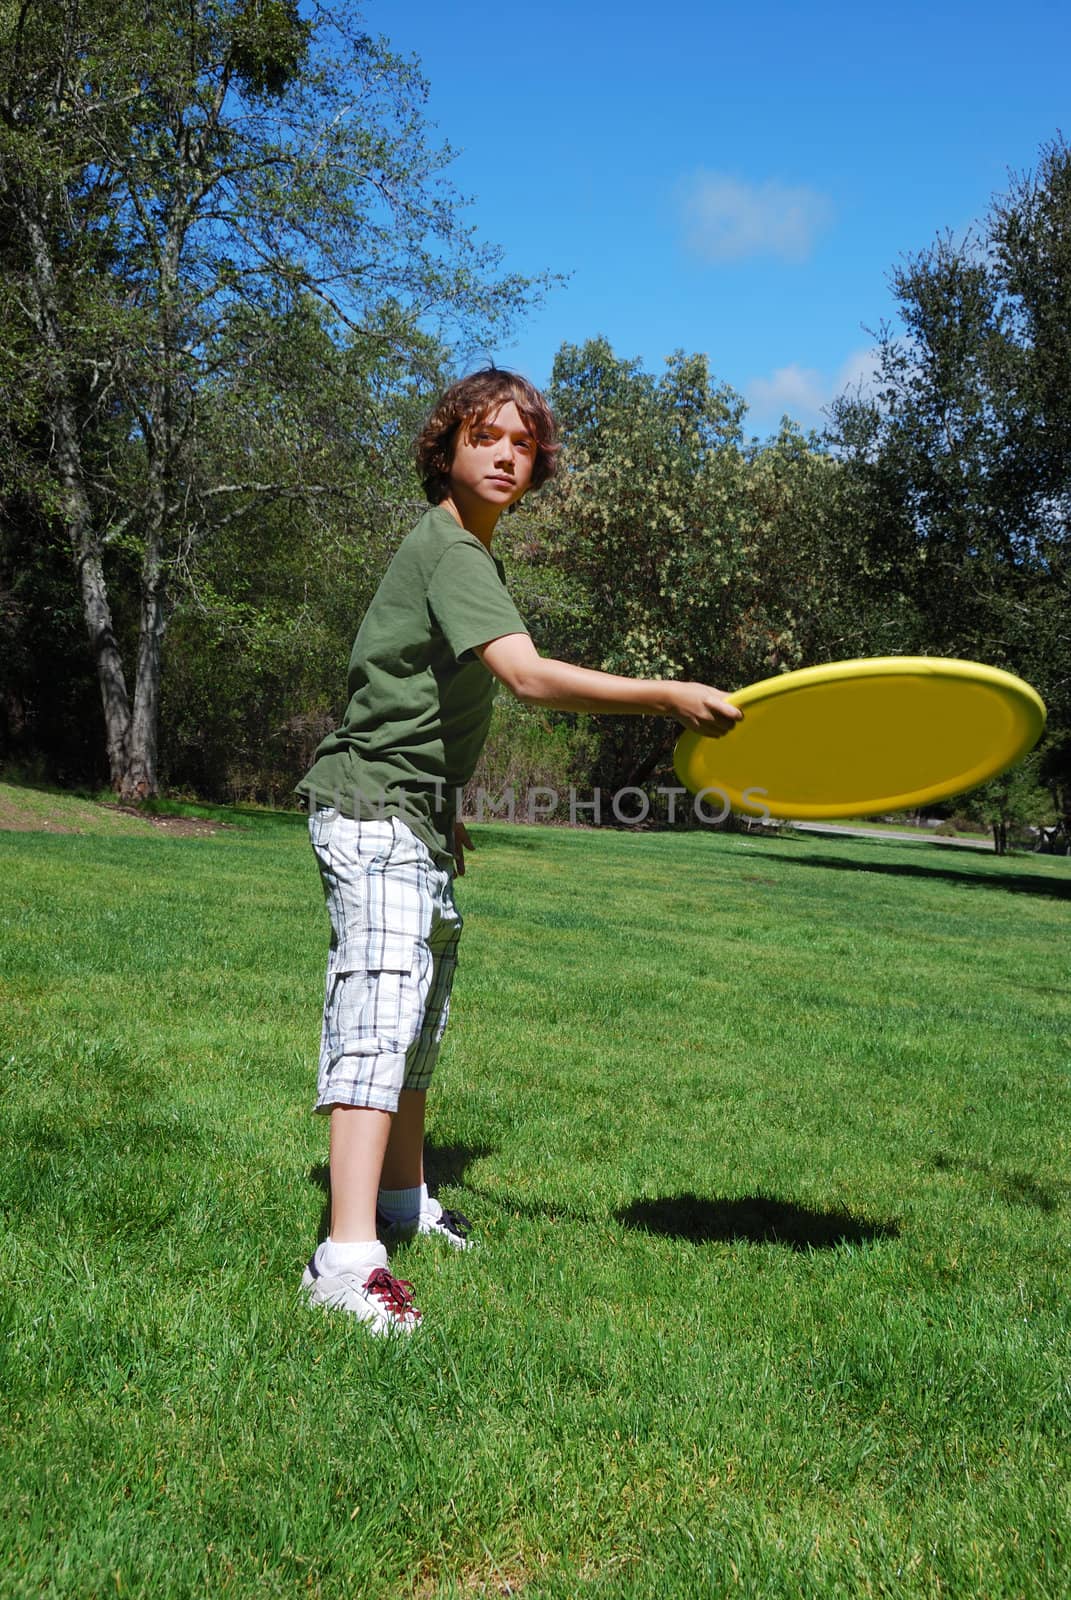 Teen boy throwing yellow frisbee with green grass, trees, and blue sky in the background.